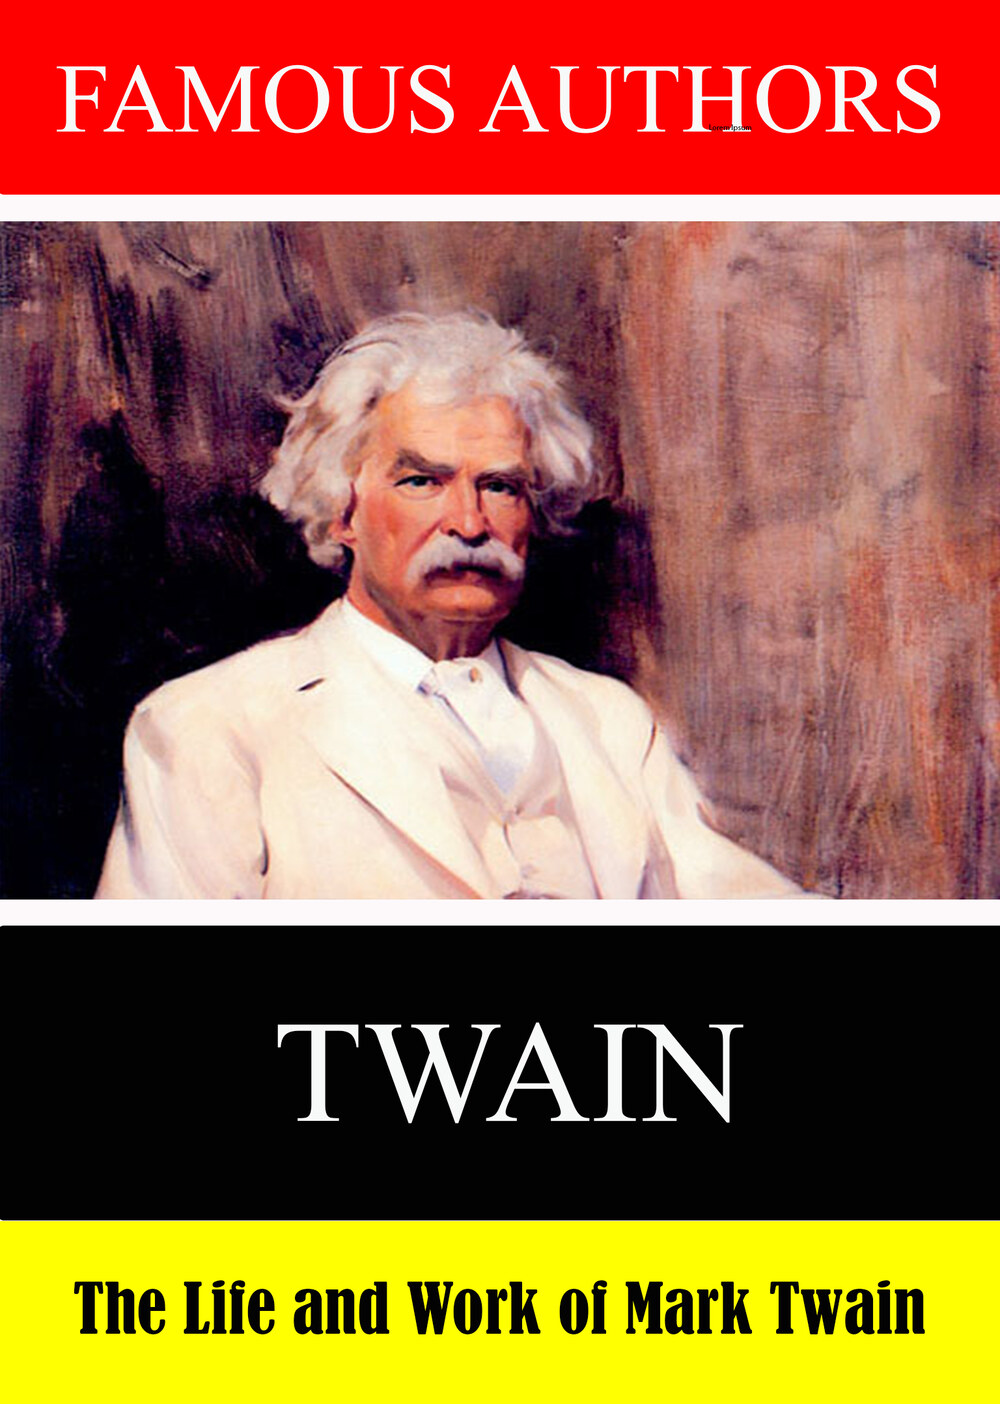 L7909 - Famous Authors: The Life and Work of Mark Twain